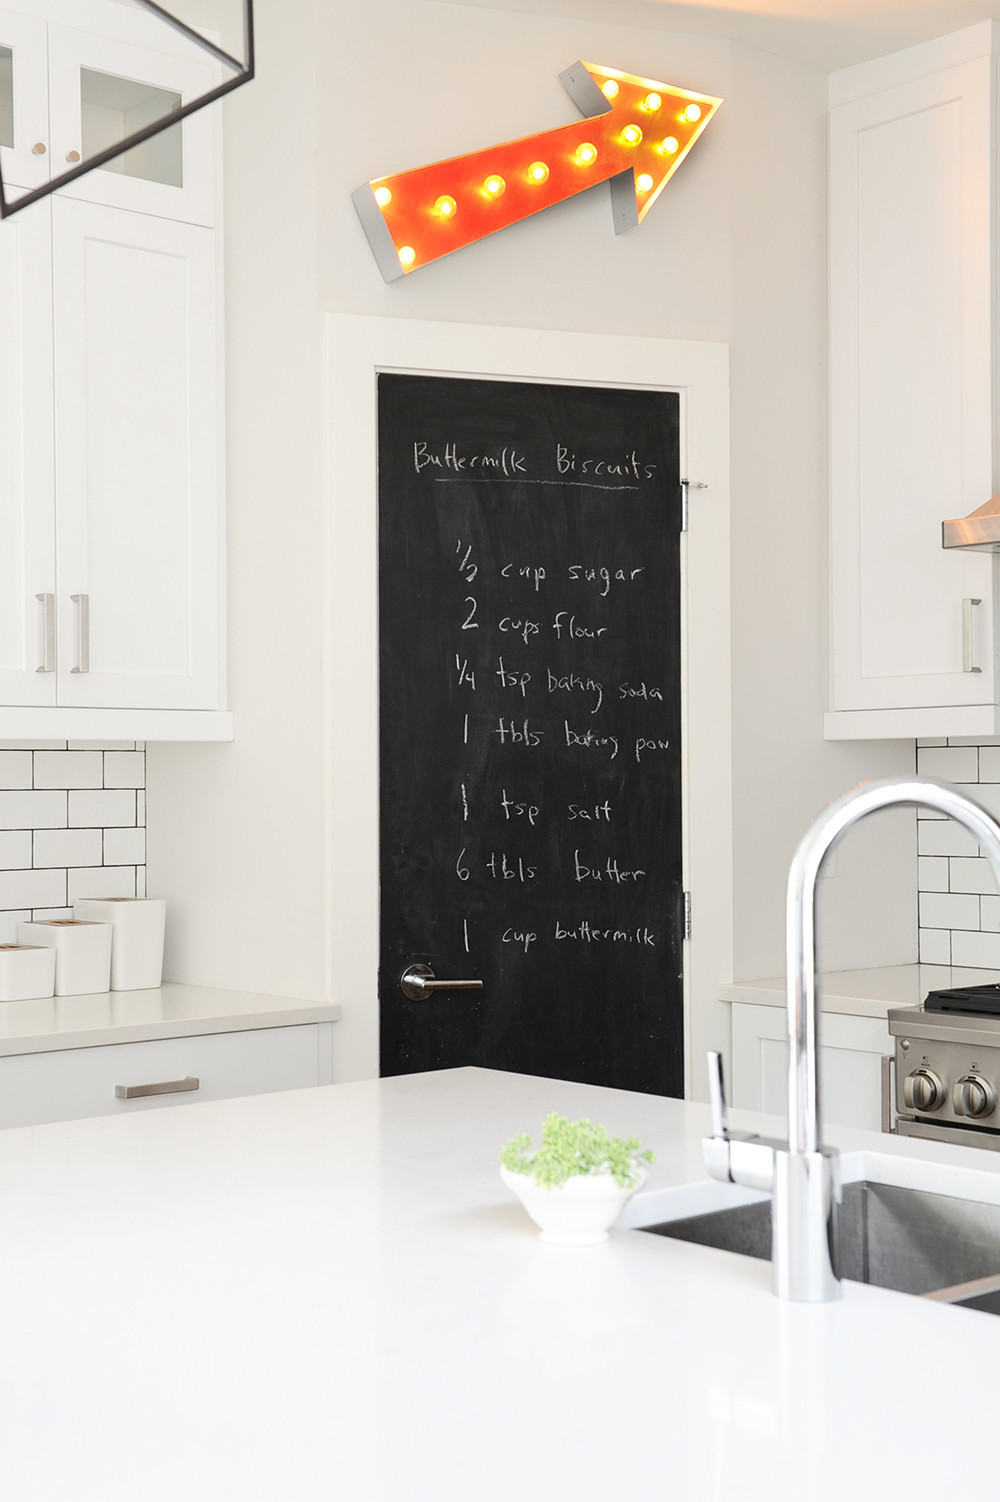 A kitchen door leading to the basement painted with chalkboard paint